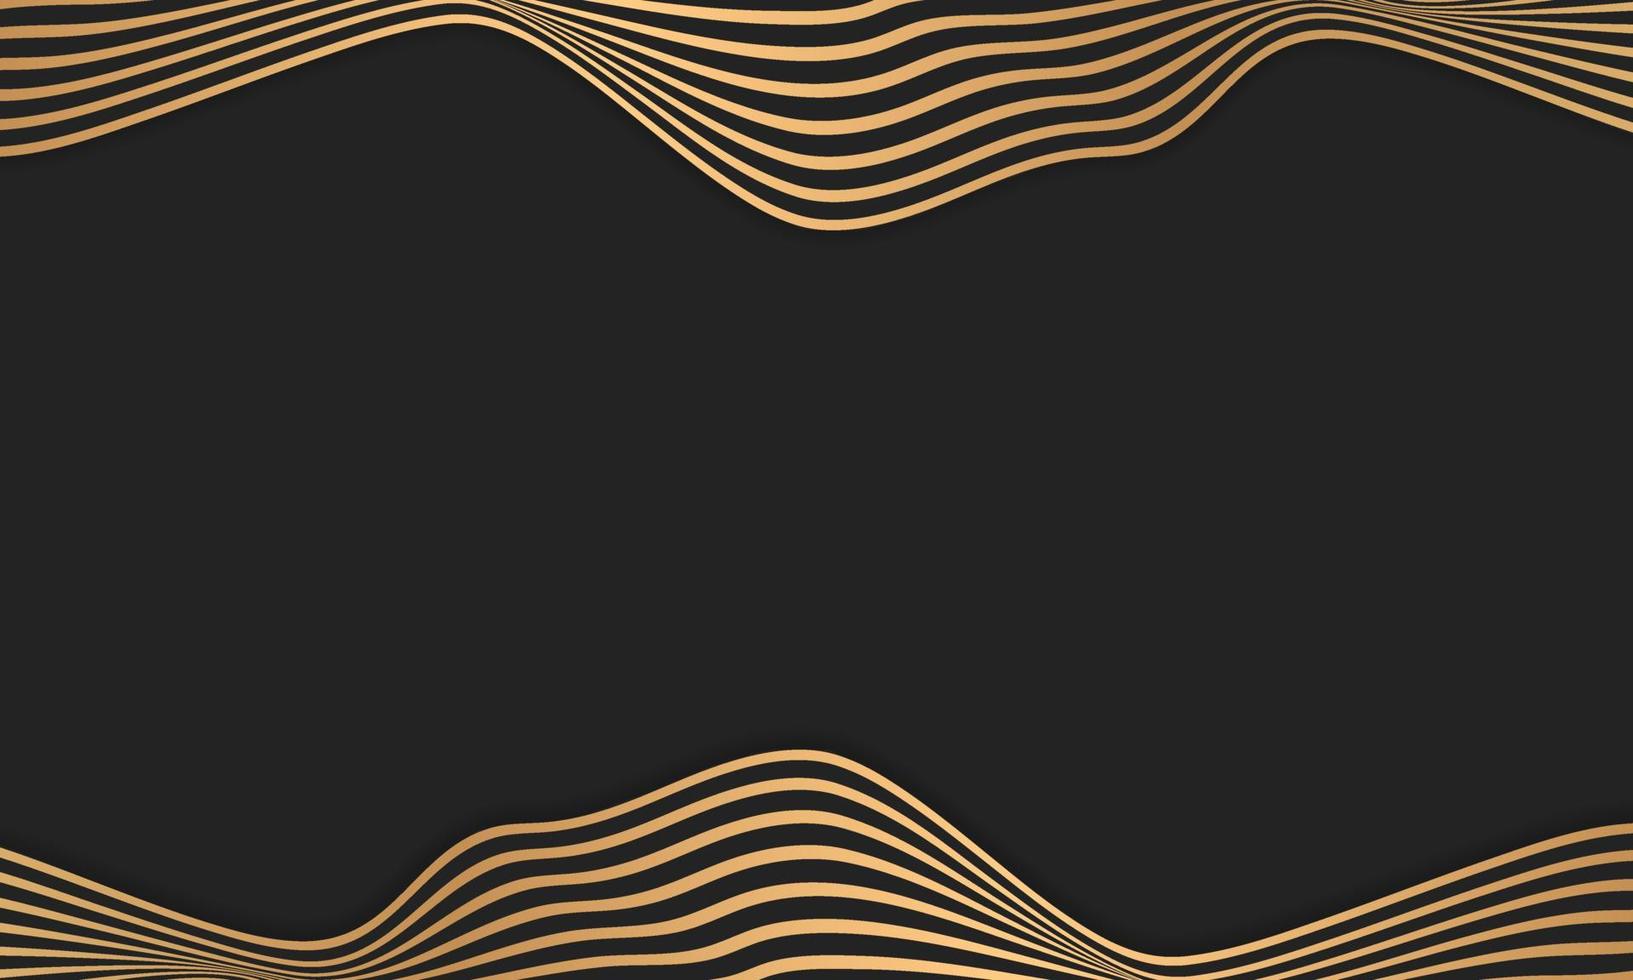 Abstract Luxury Stripe Background In Black And Gold With Wavy Lines Pattern. vector